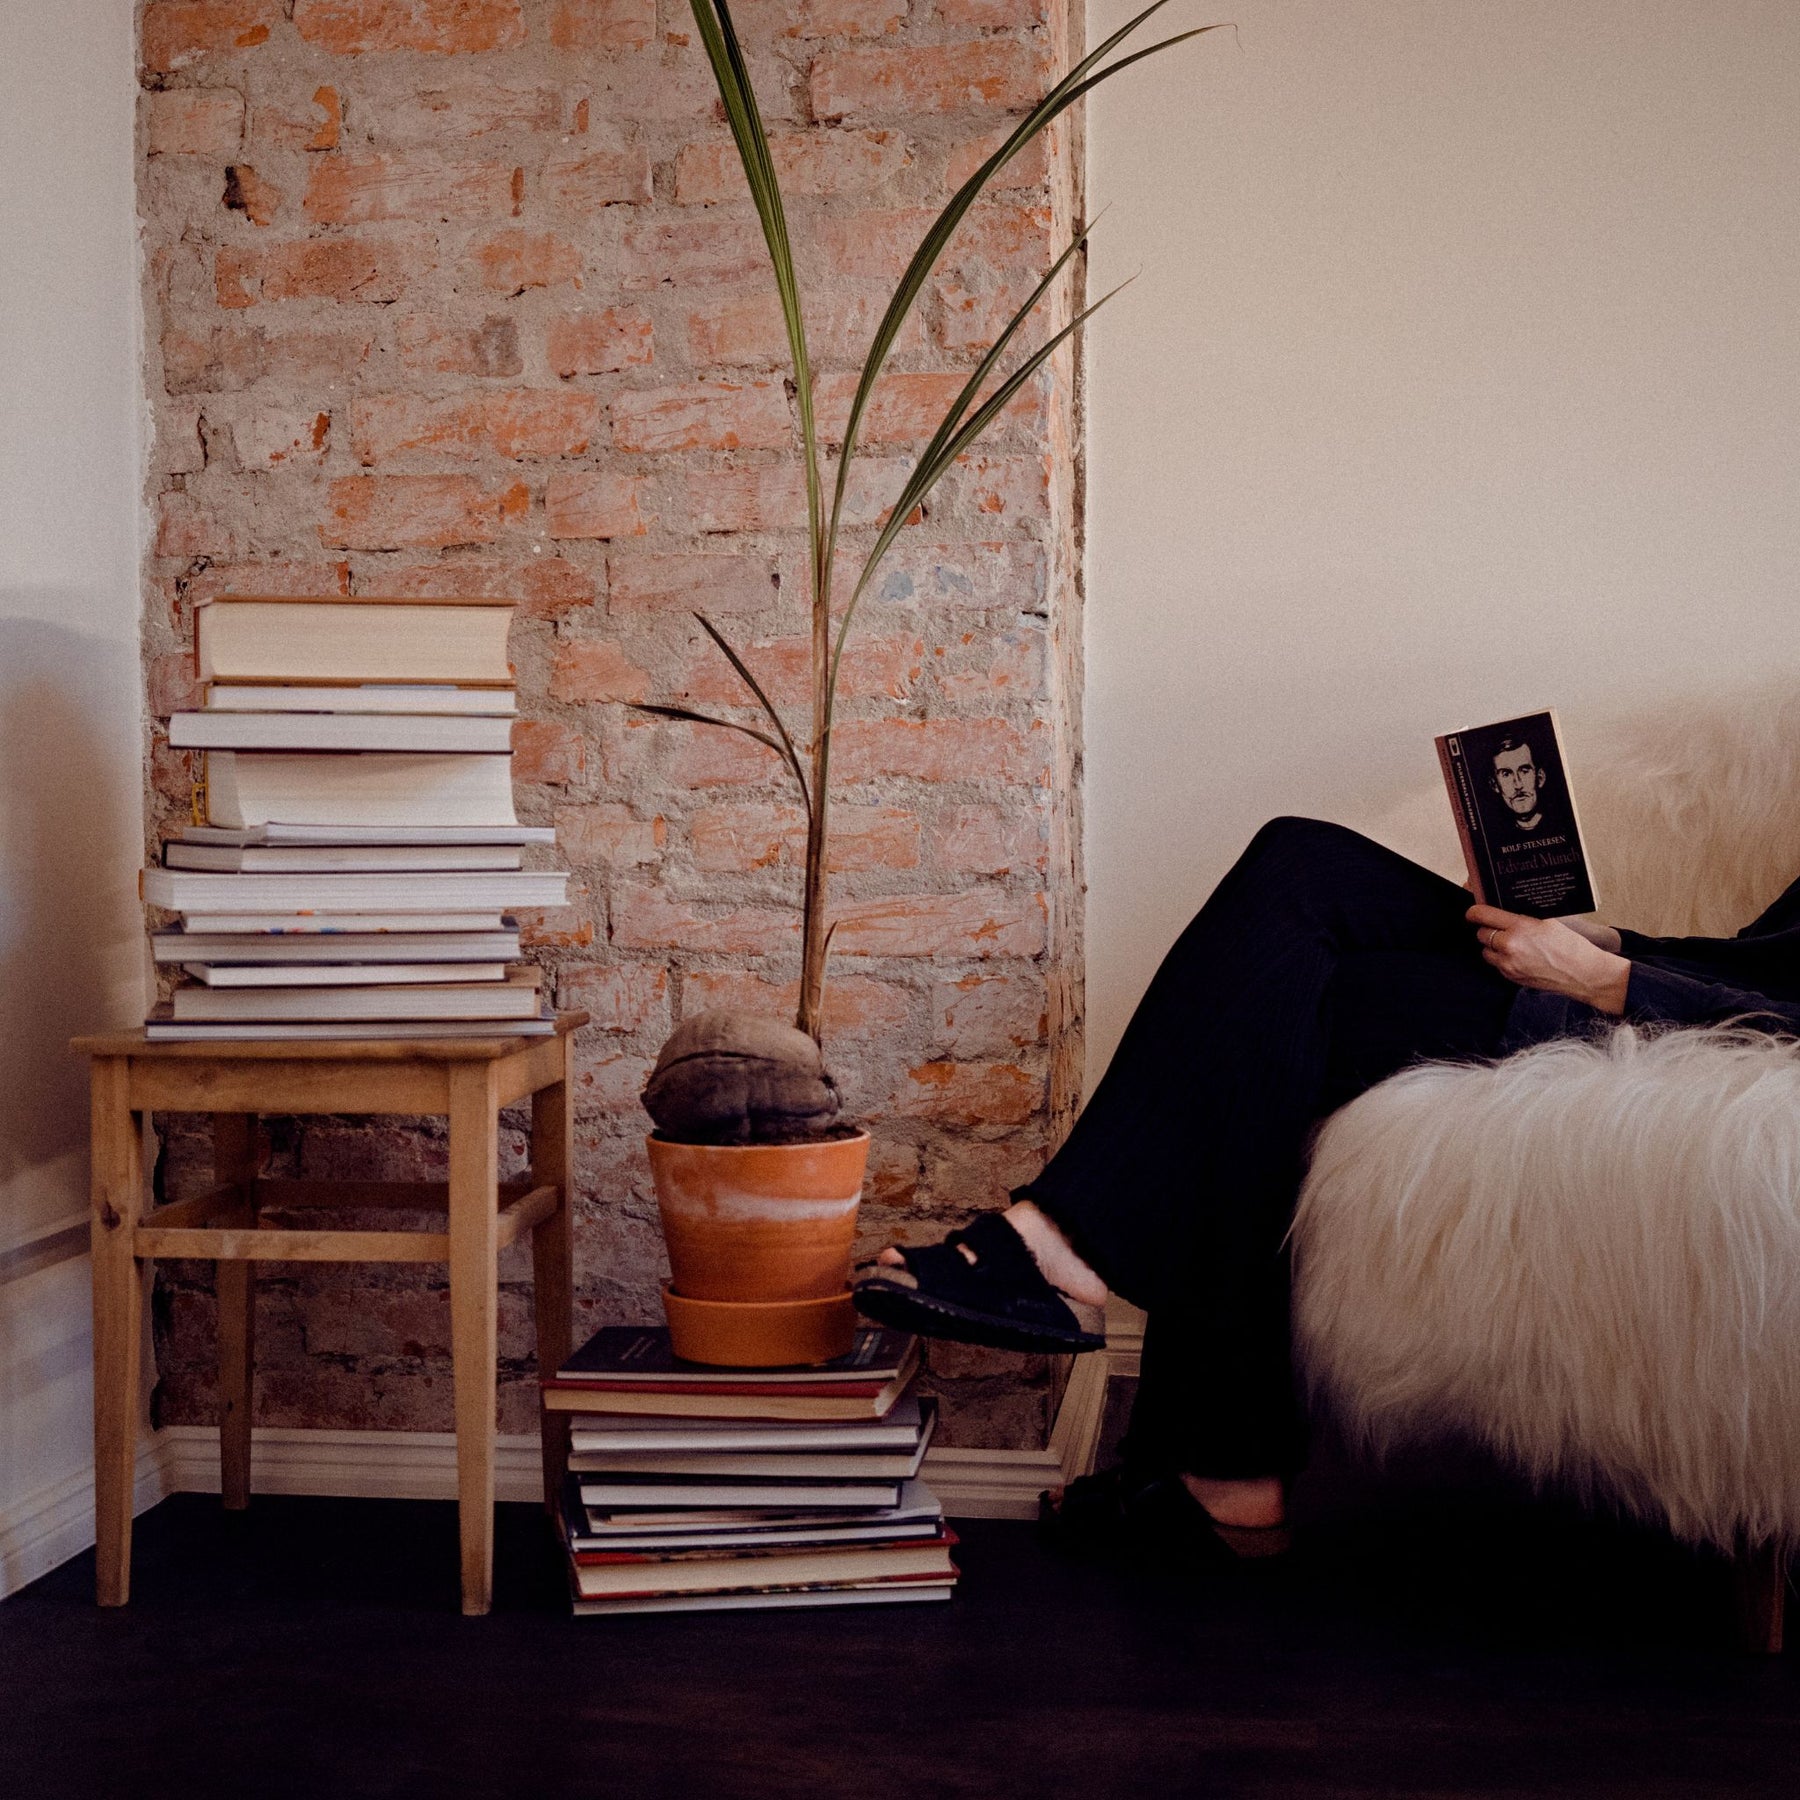 Eikund Fluffy Lounge Chair Natural White Sheepskin in Loft with Woman Reading by Plant and Bookstacks